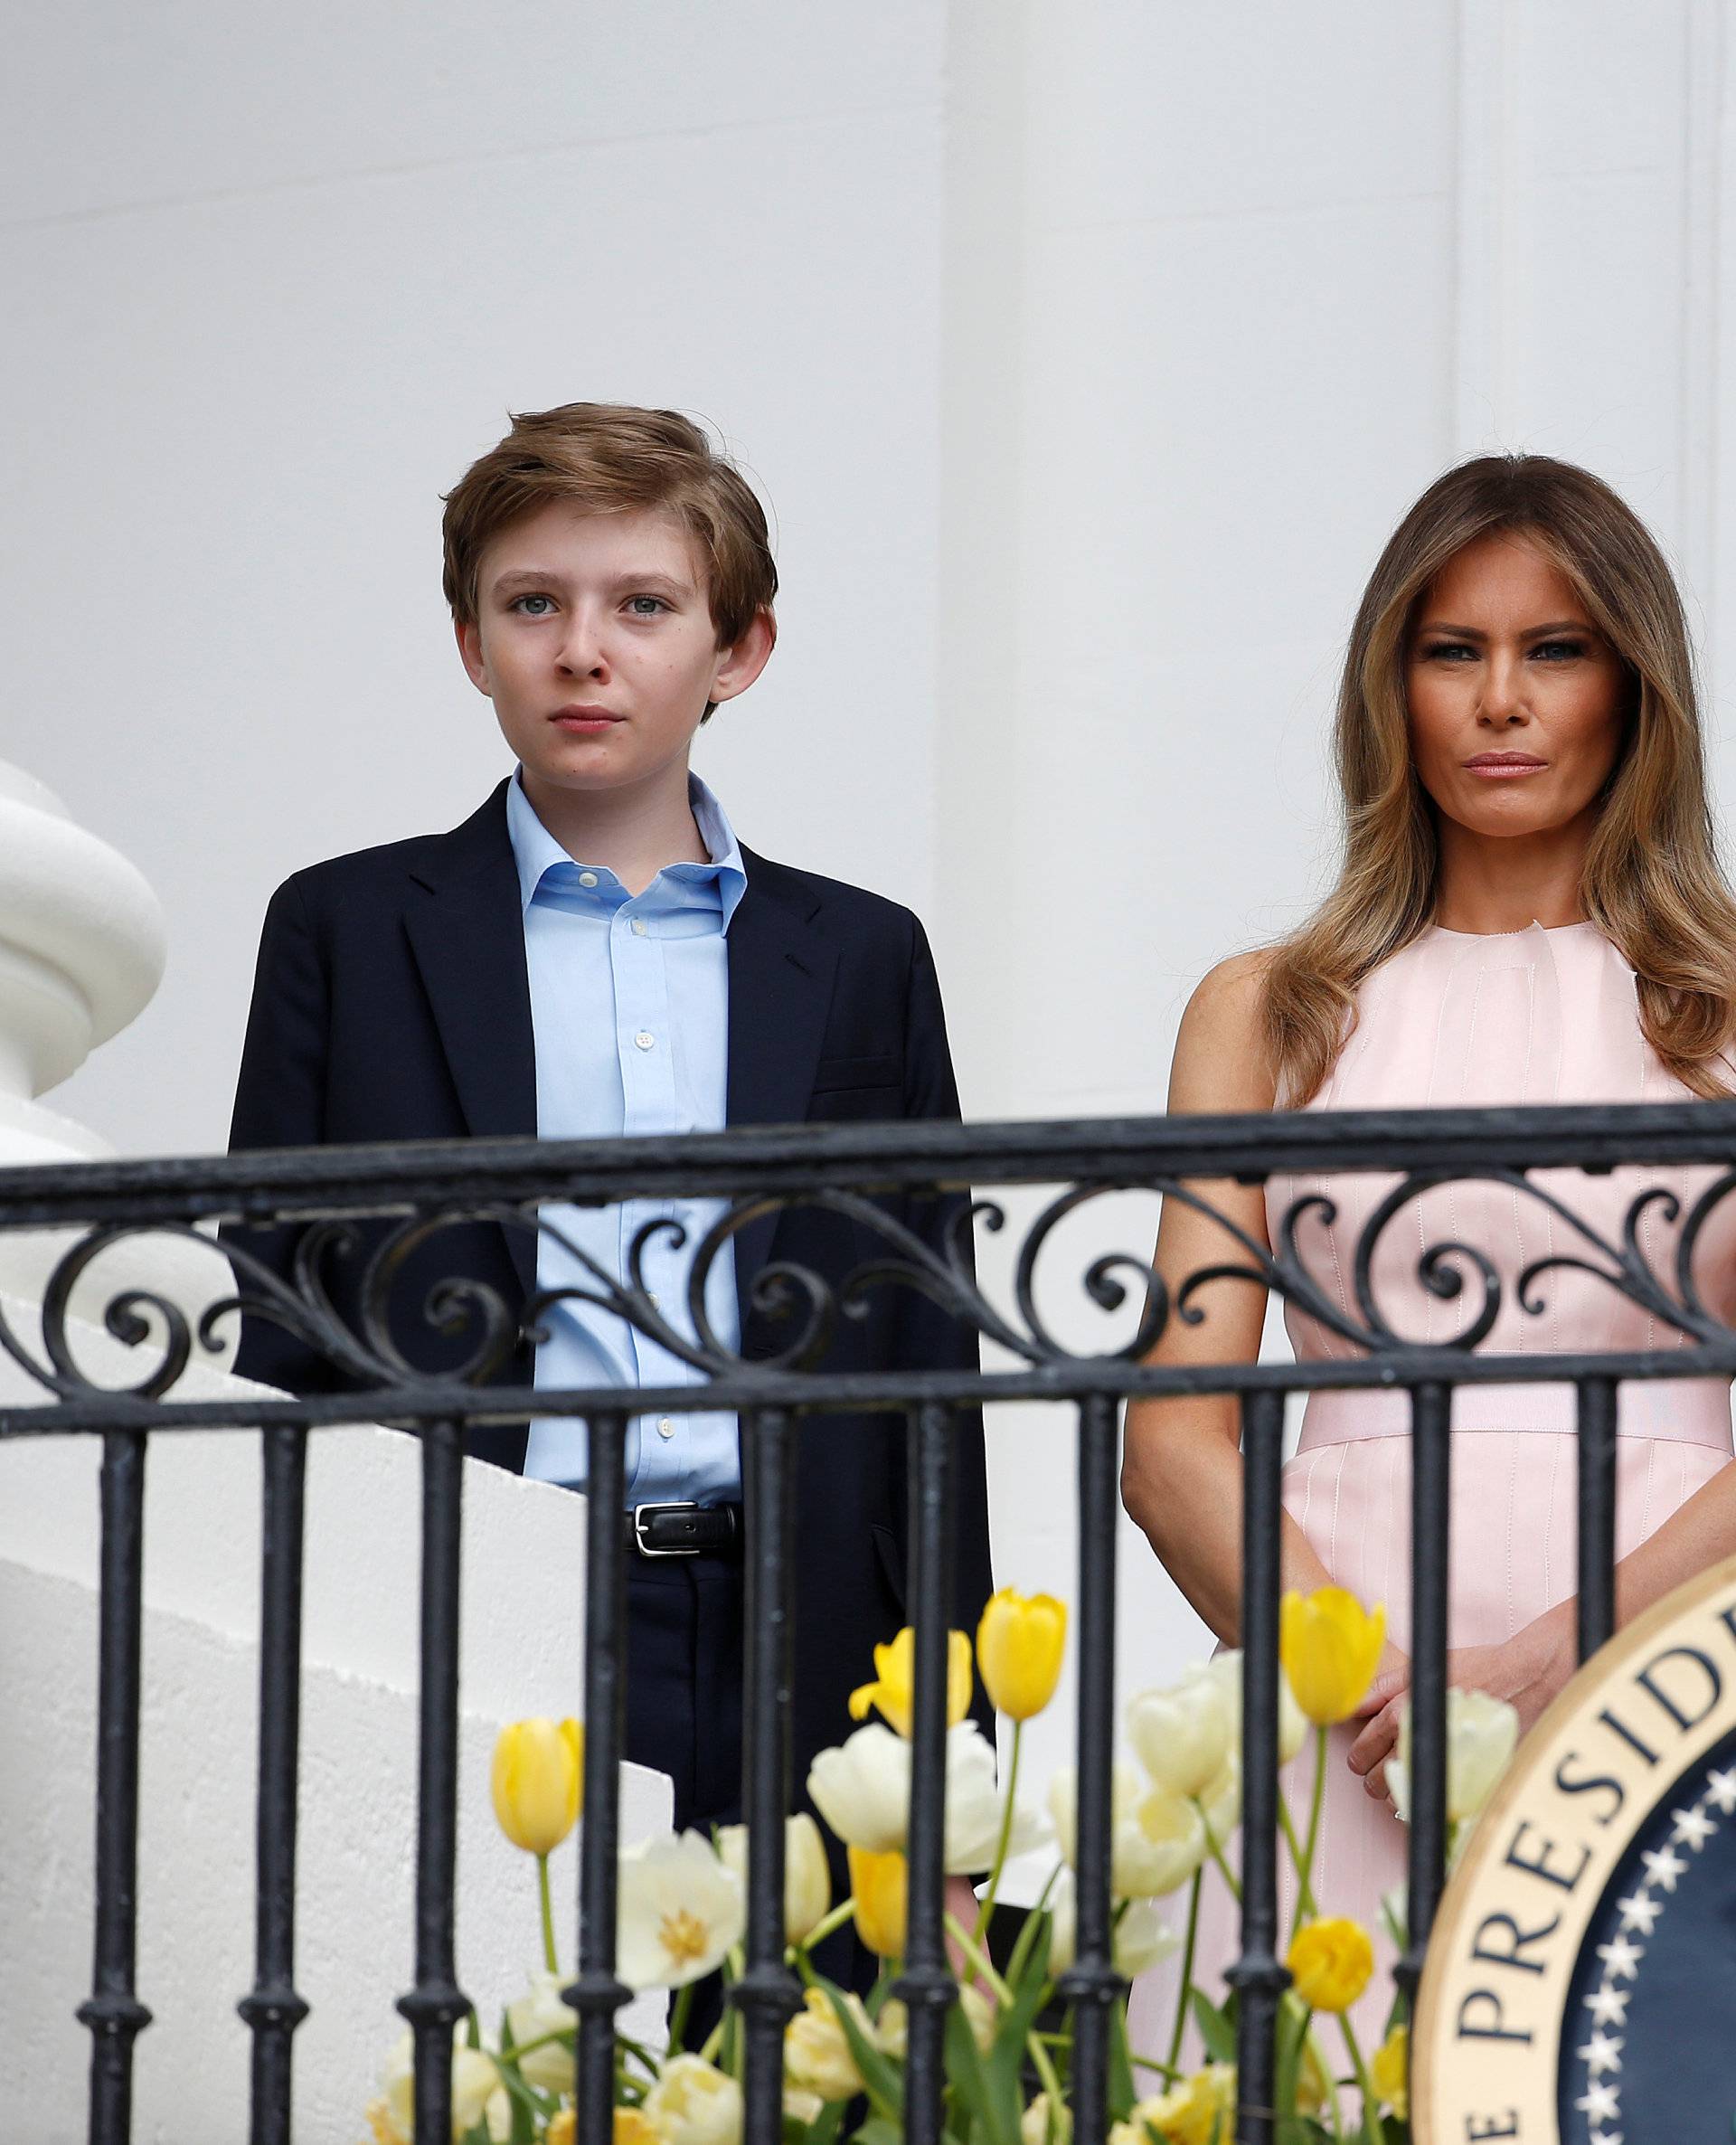 U.S. President Donald Trump speaks as U.S. first lady Melania Trump and their son Barron listen at the 139th annual White House Easter Egg Roll on the South Lawn of the White House in Washington